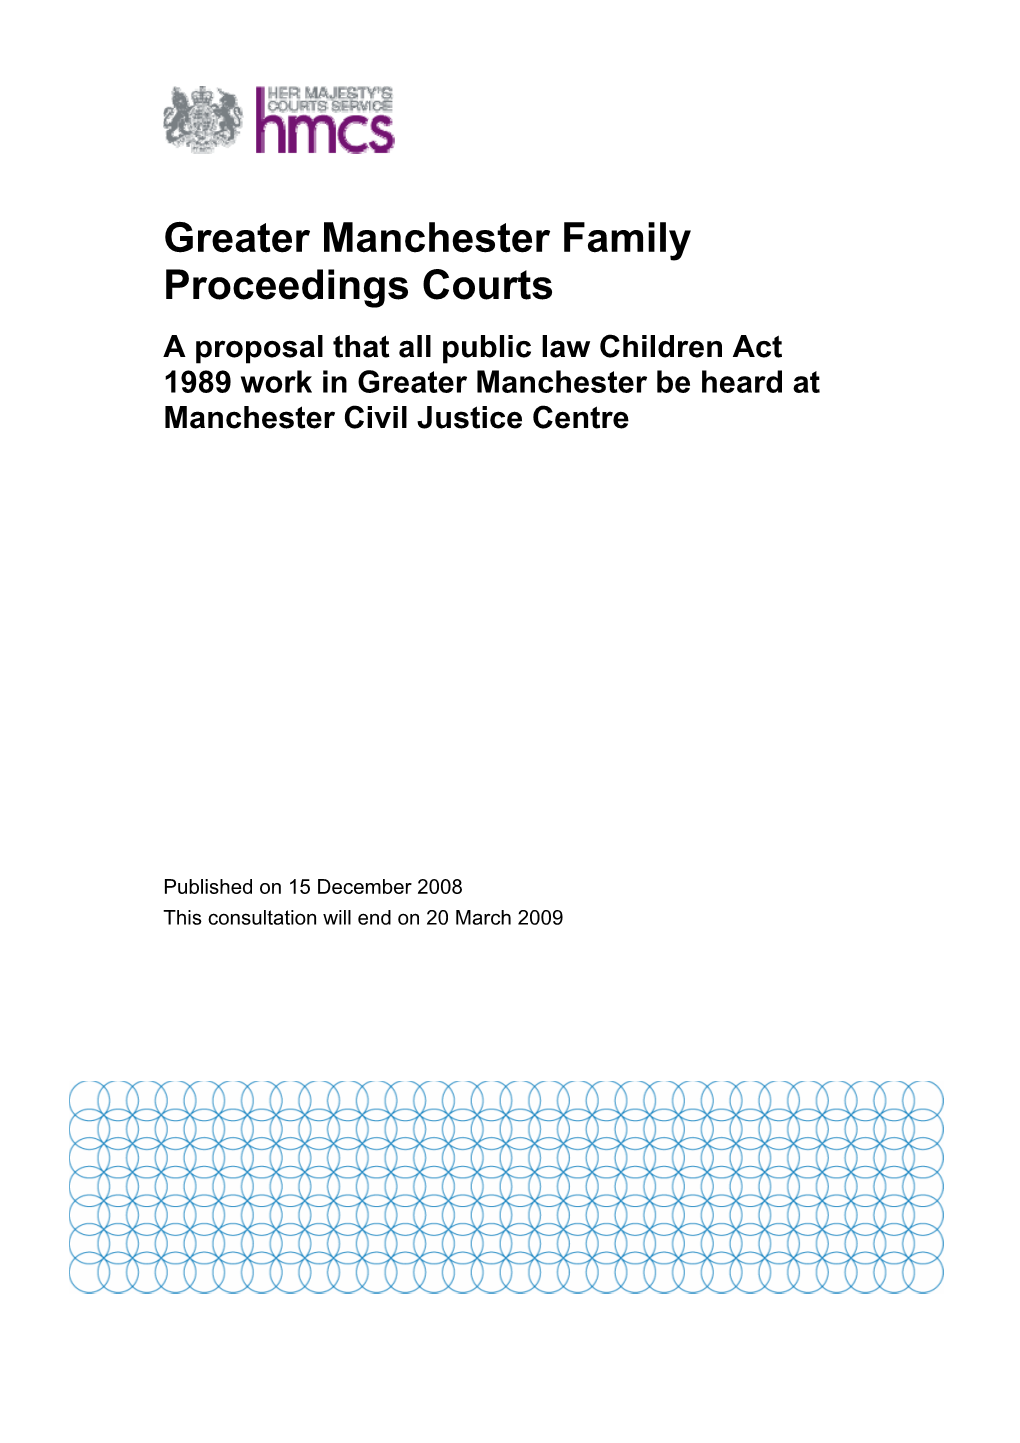 Greater Manchester Family Proceedings Courts a Proposal That All Public Law Children Act 1989 Work in Greater Manchester Be Heard at Manchester Civil Justice Centre